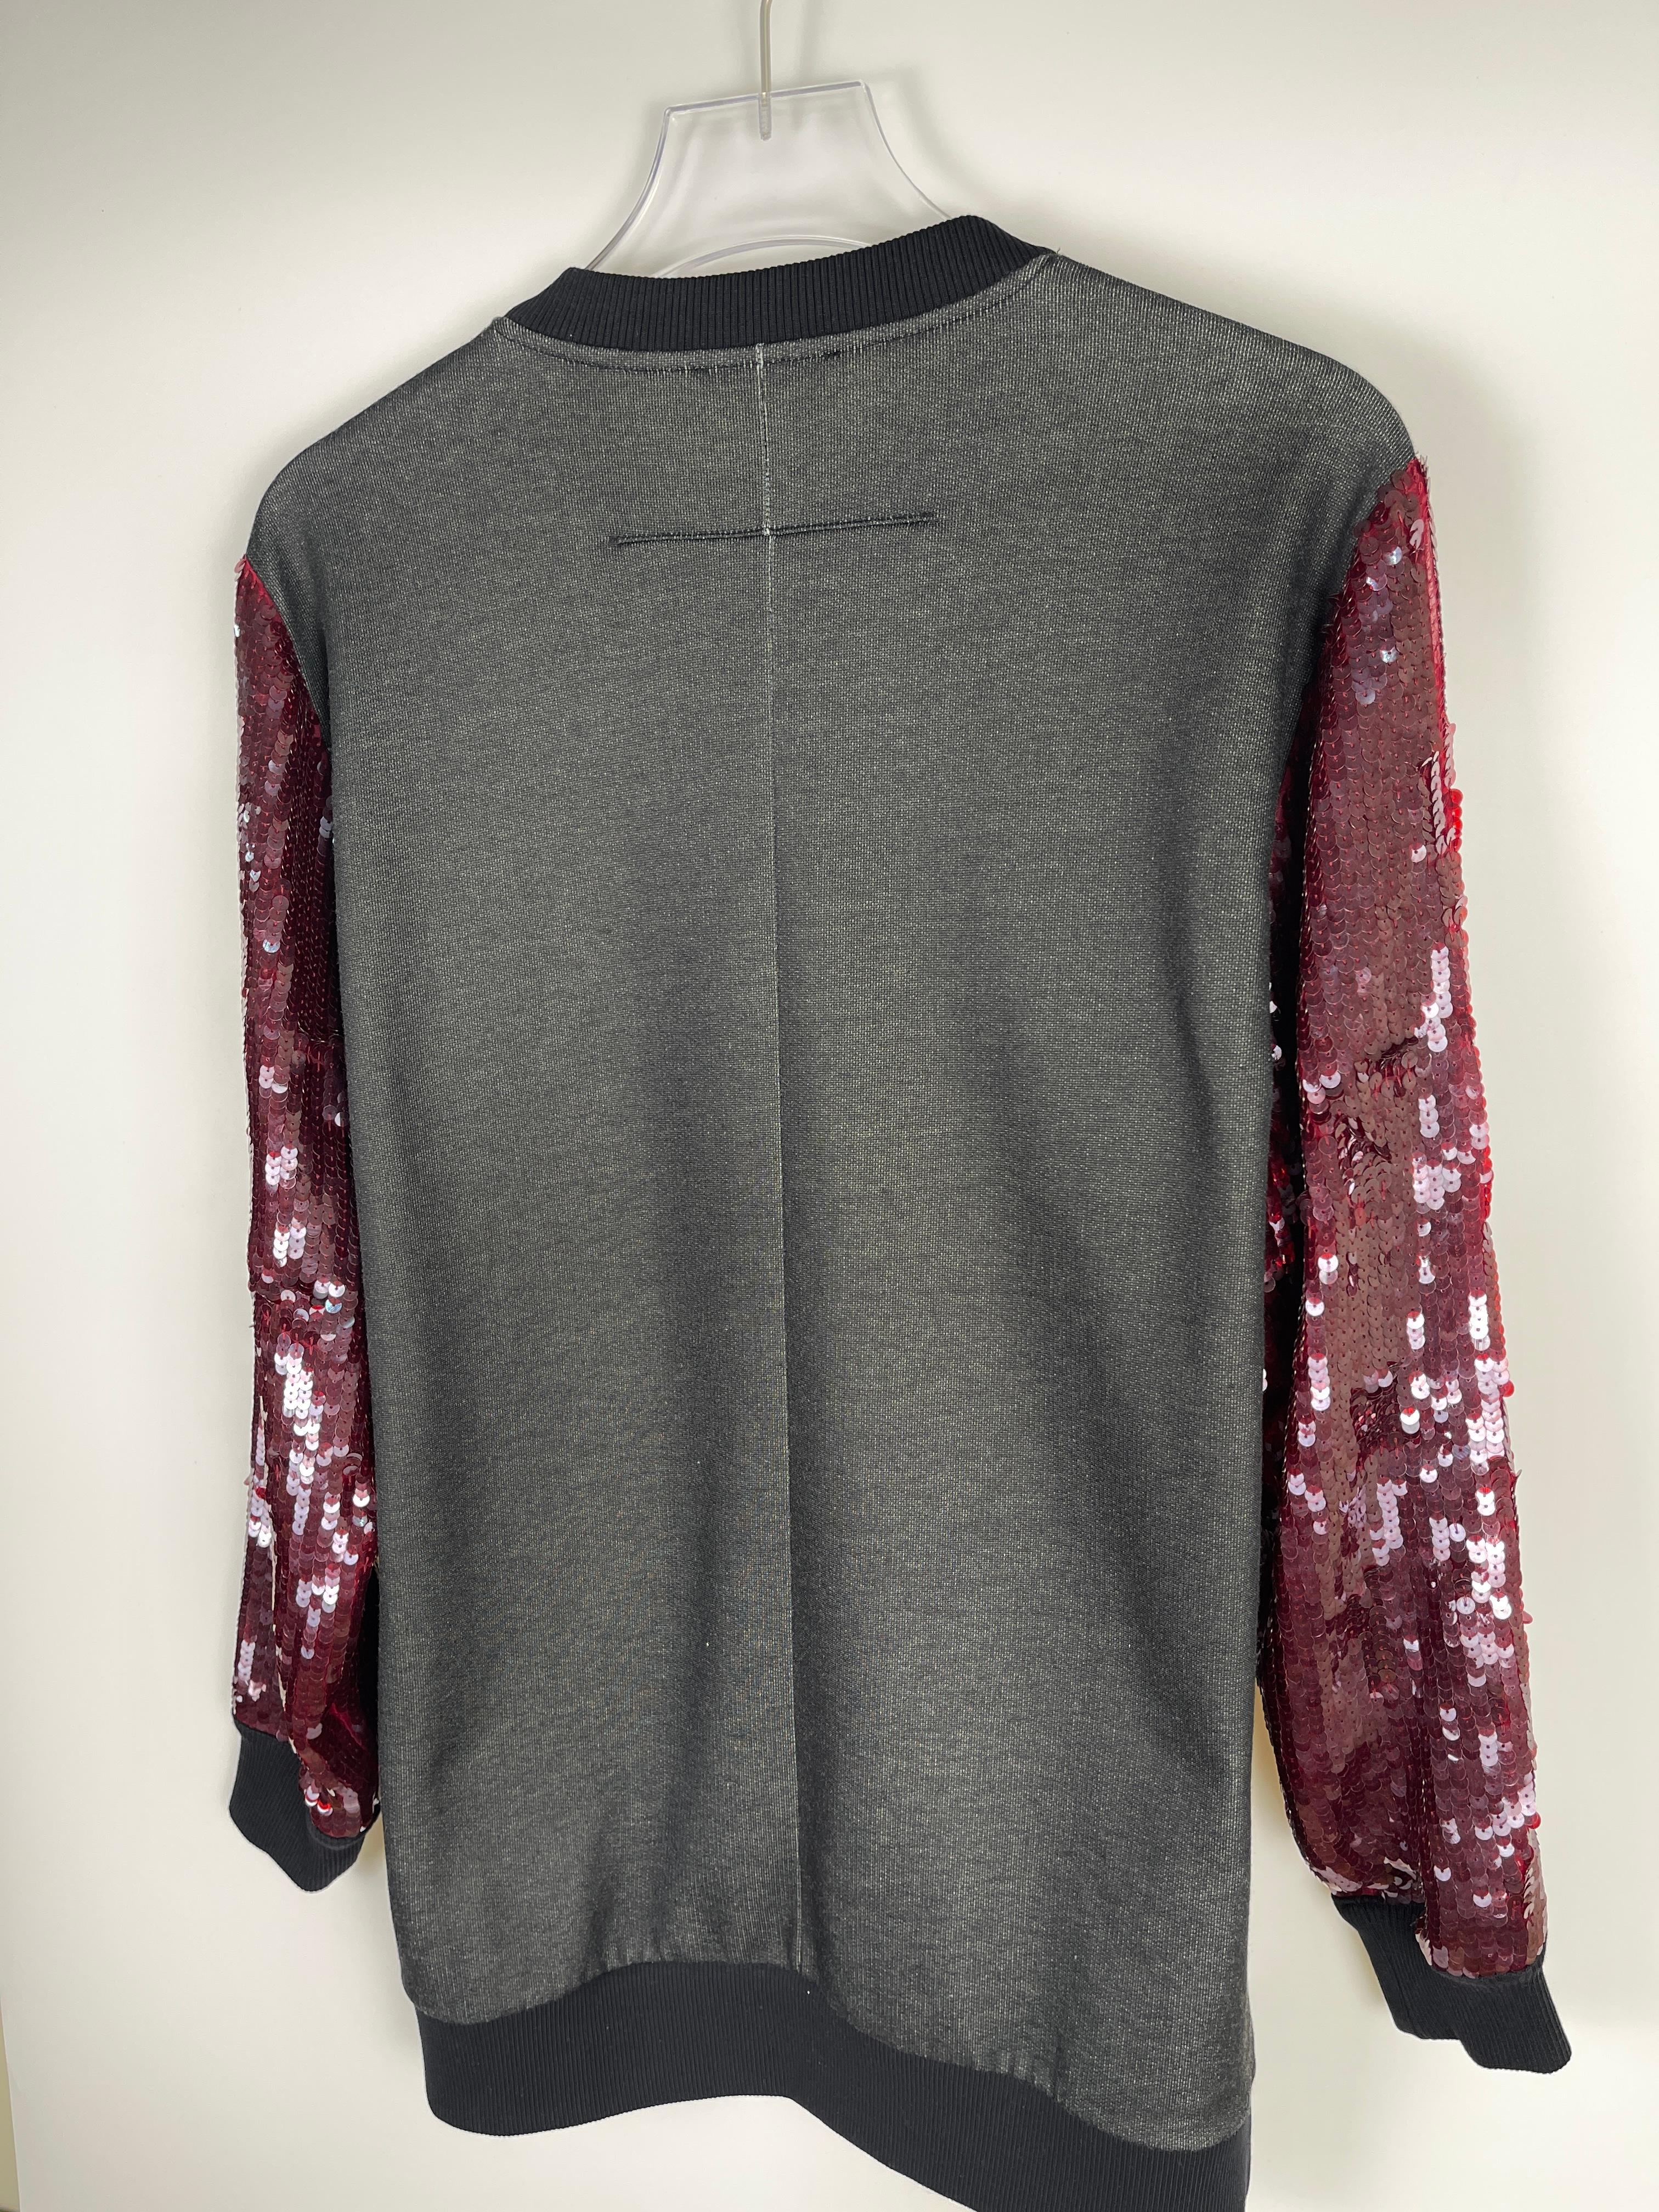 Givenchy F/W2013 Sequinn Ecstasy Sweatshirt In Excellent Condition For Sale In Tương Mai Ward, Hoang Mai District